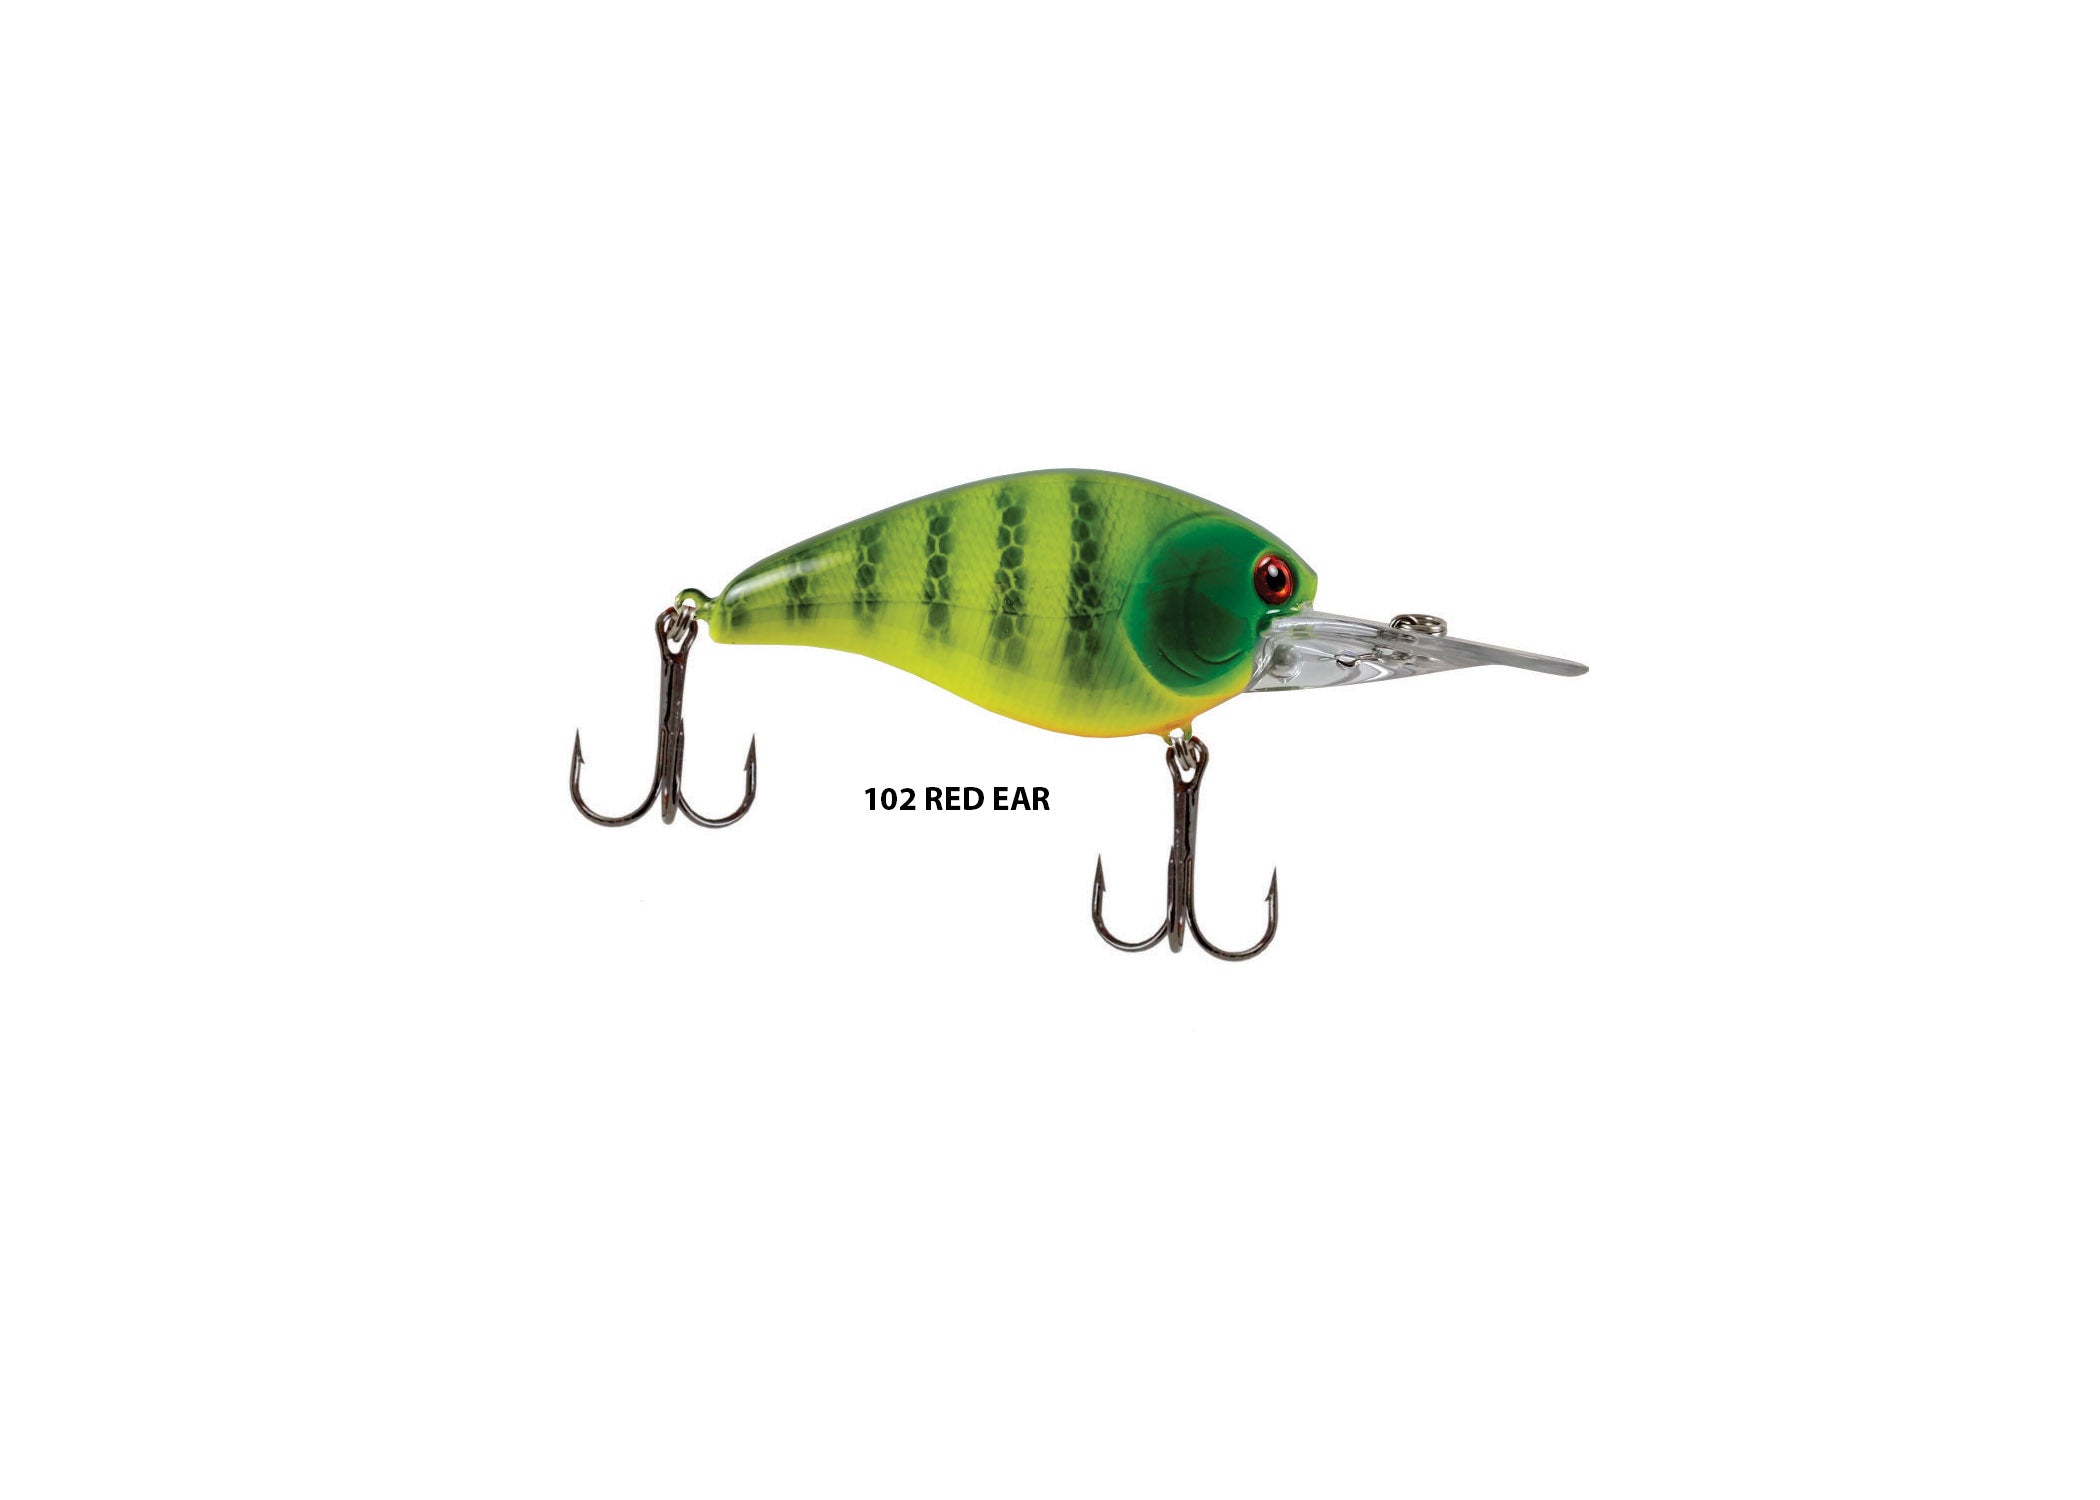 Custom Painted Lures 2.5 Green and Orange Crawfish Crankbait, Fishing  Lures, Bass Lures. Lures. 